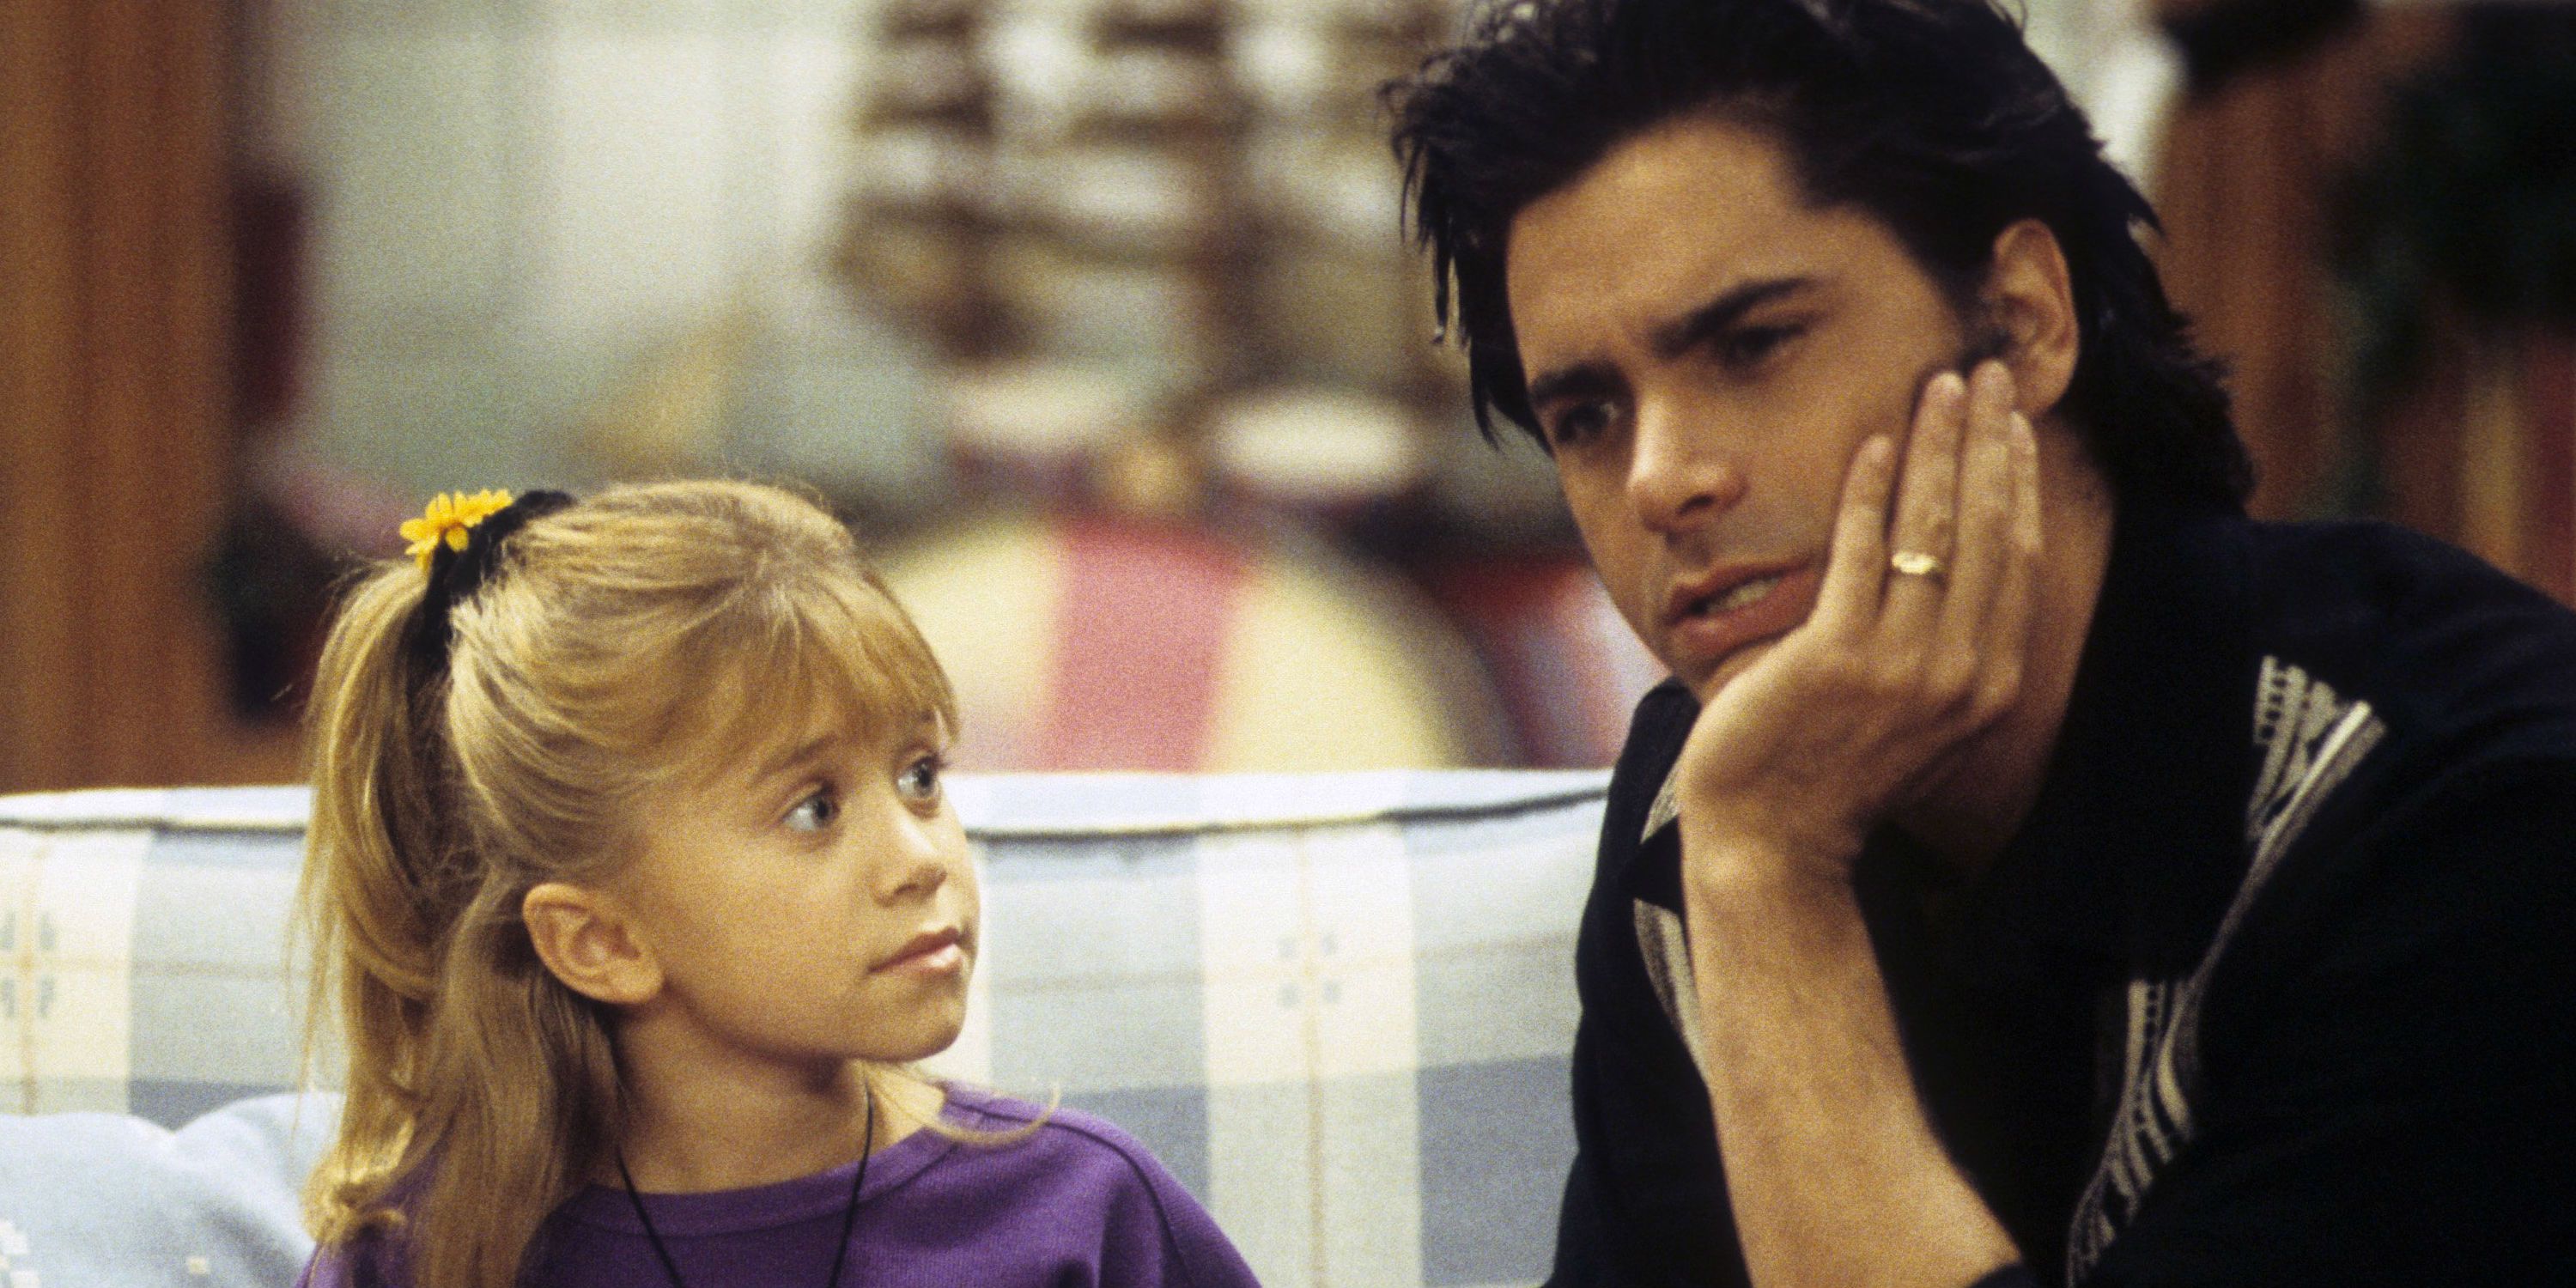 John Stamos Has No Time For Full House Theme Song While In San Francisco